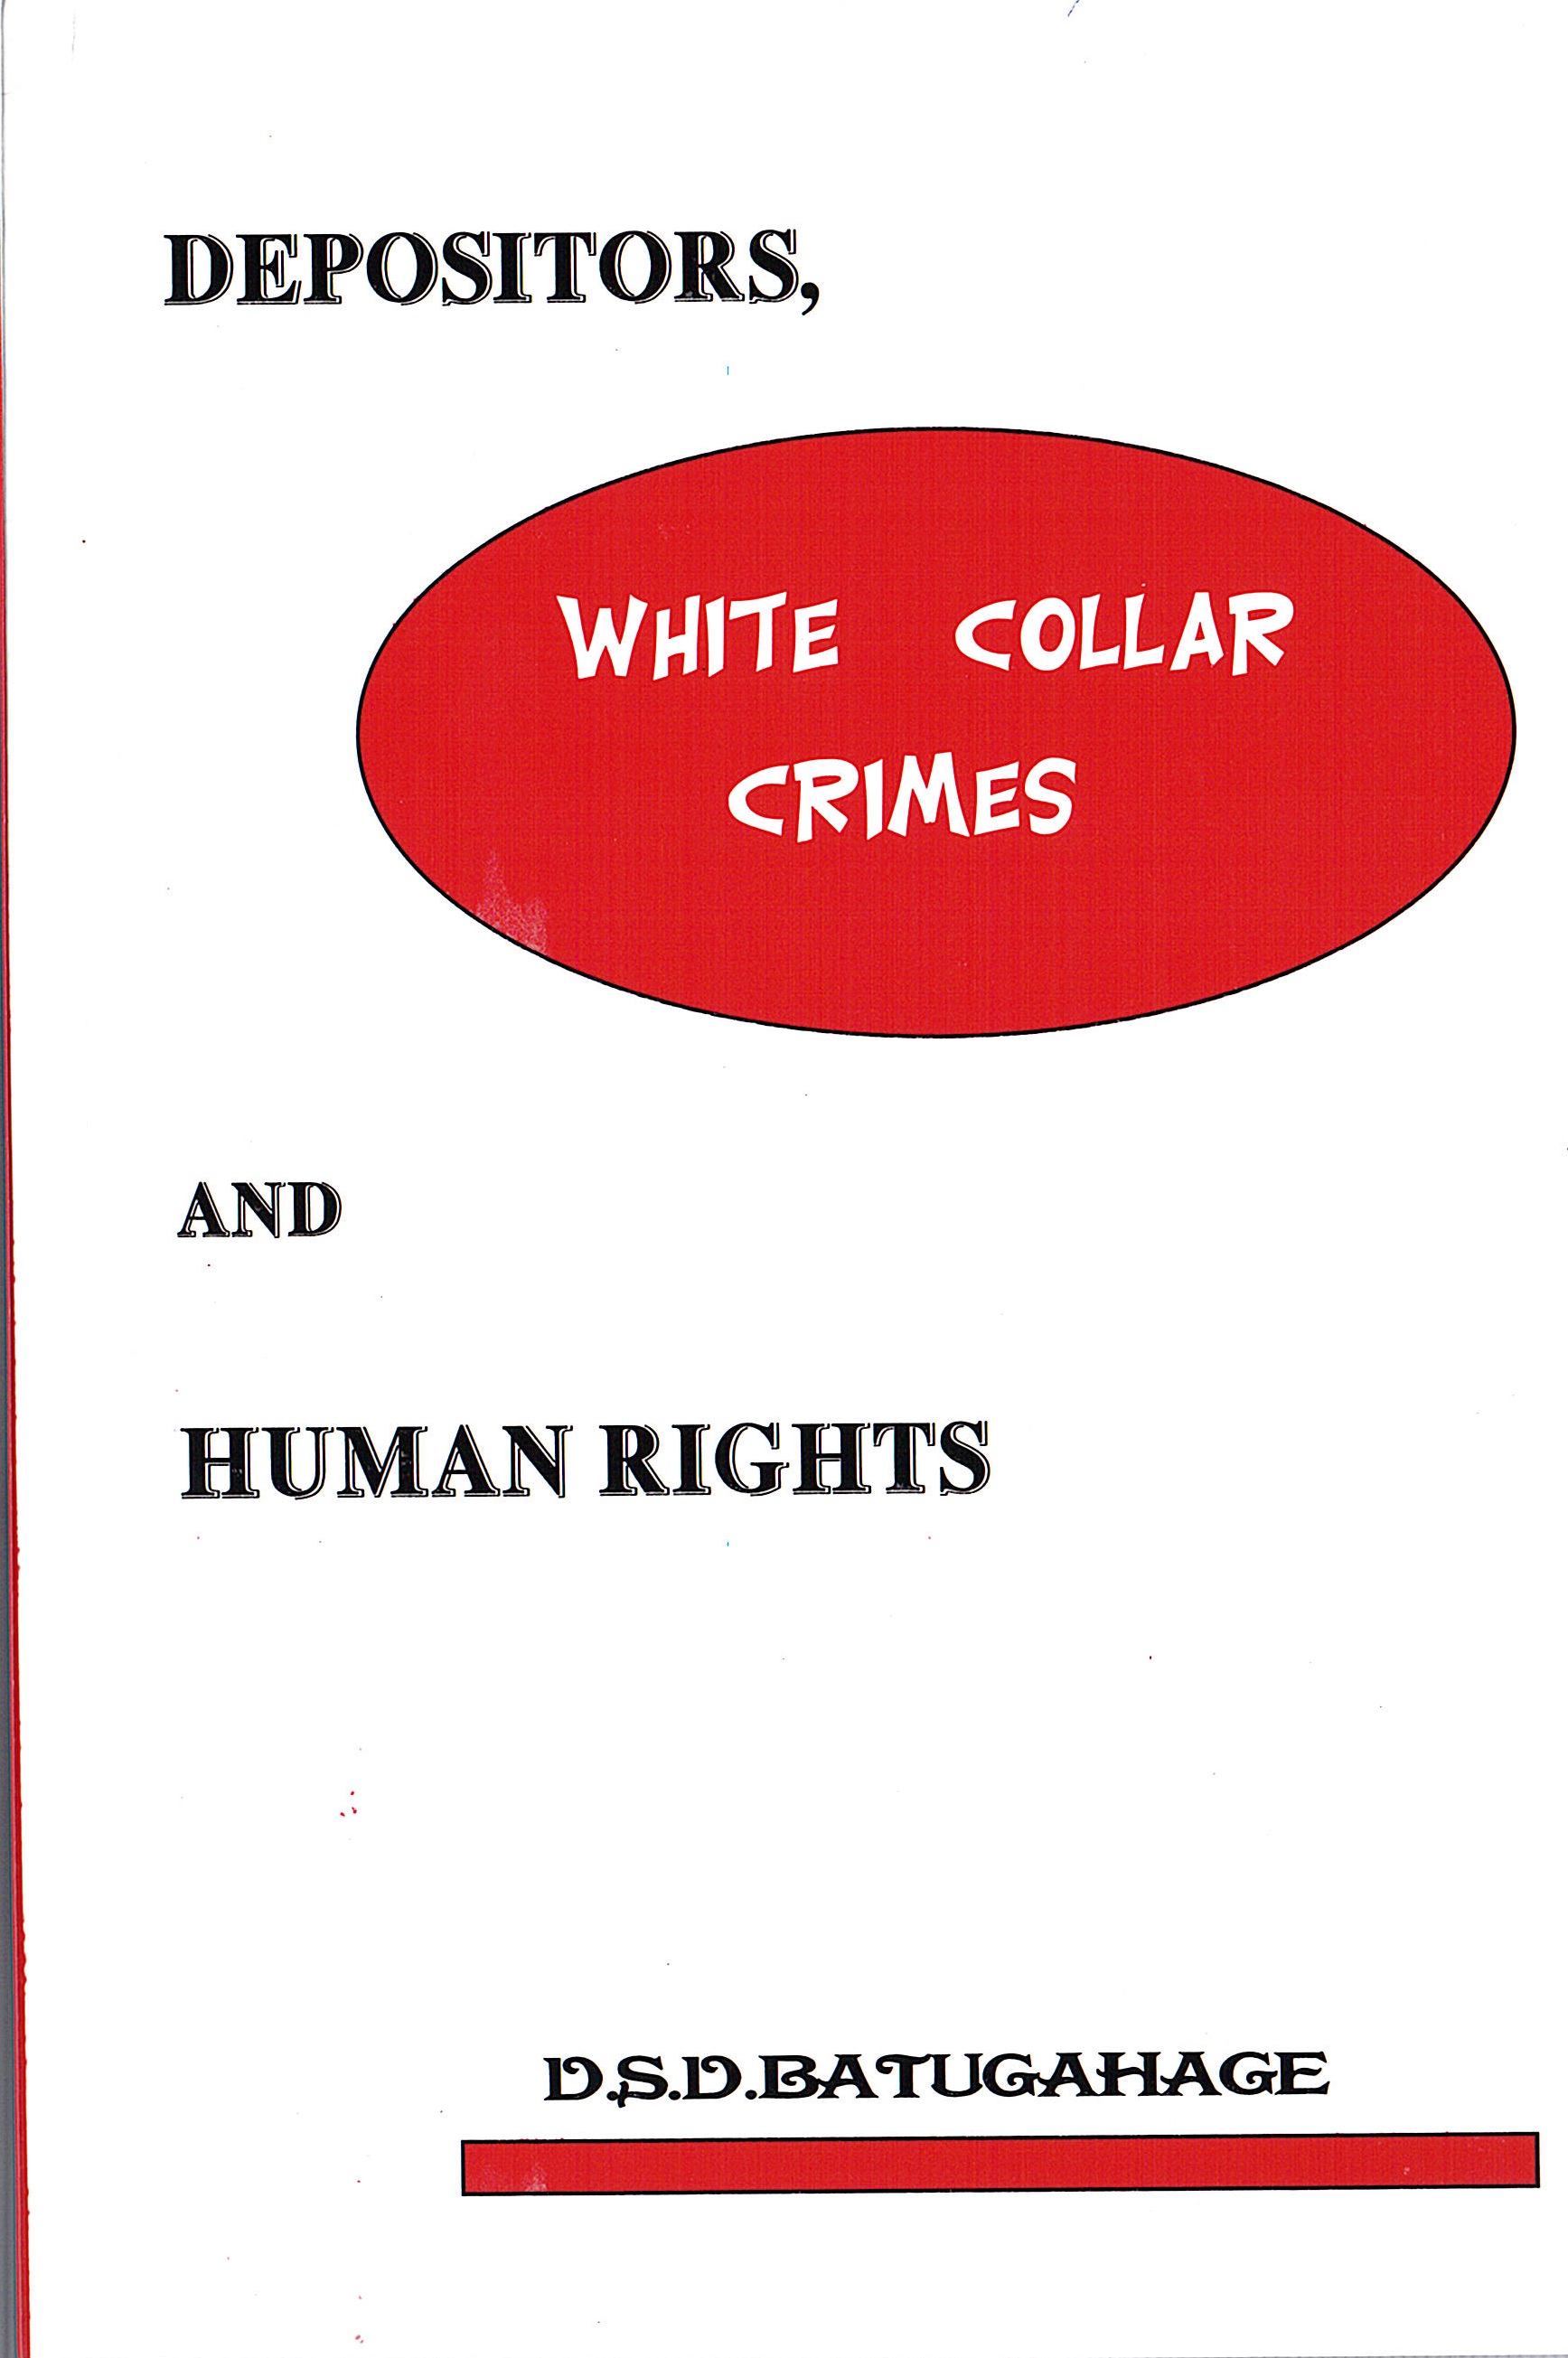 Depositors White Collar Crimes And Human Rights